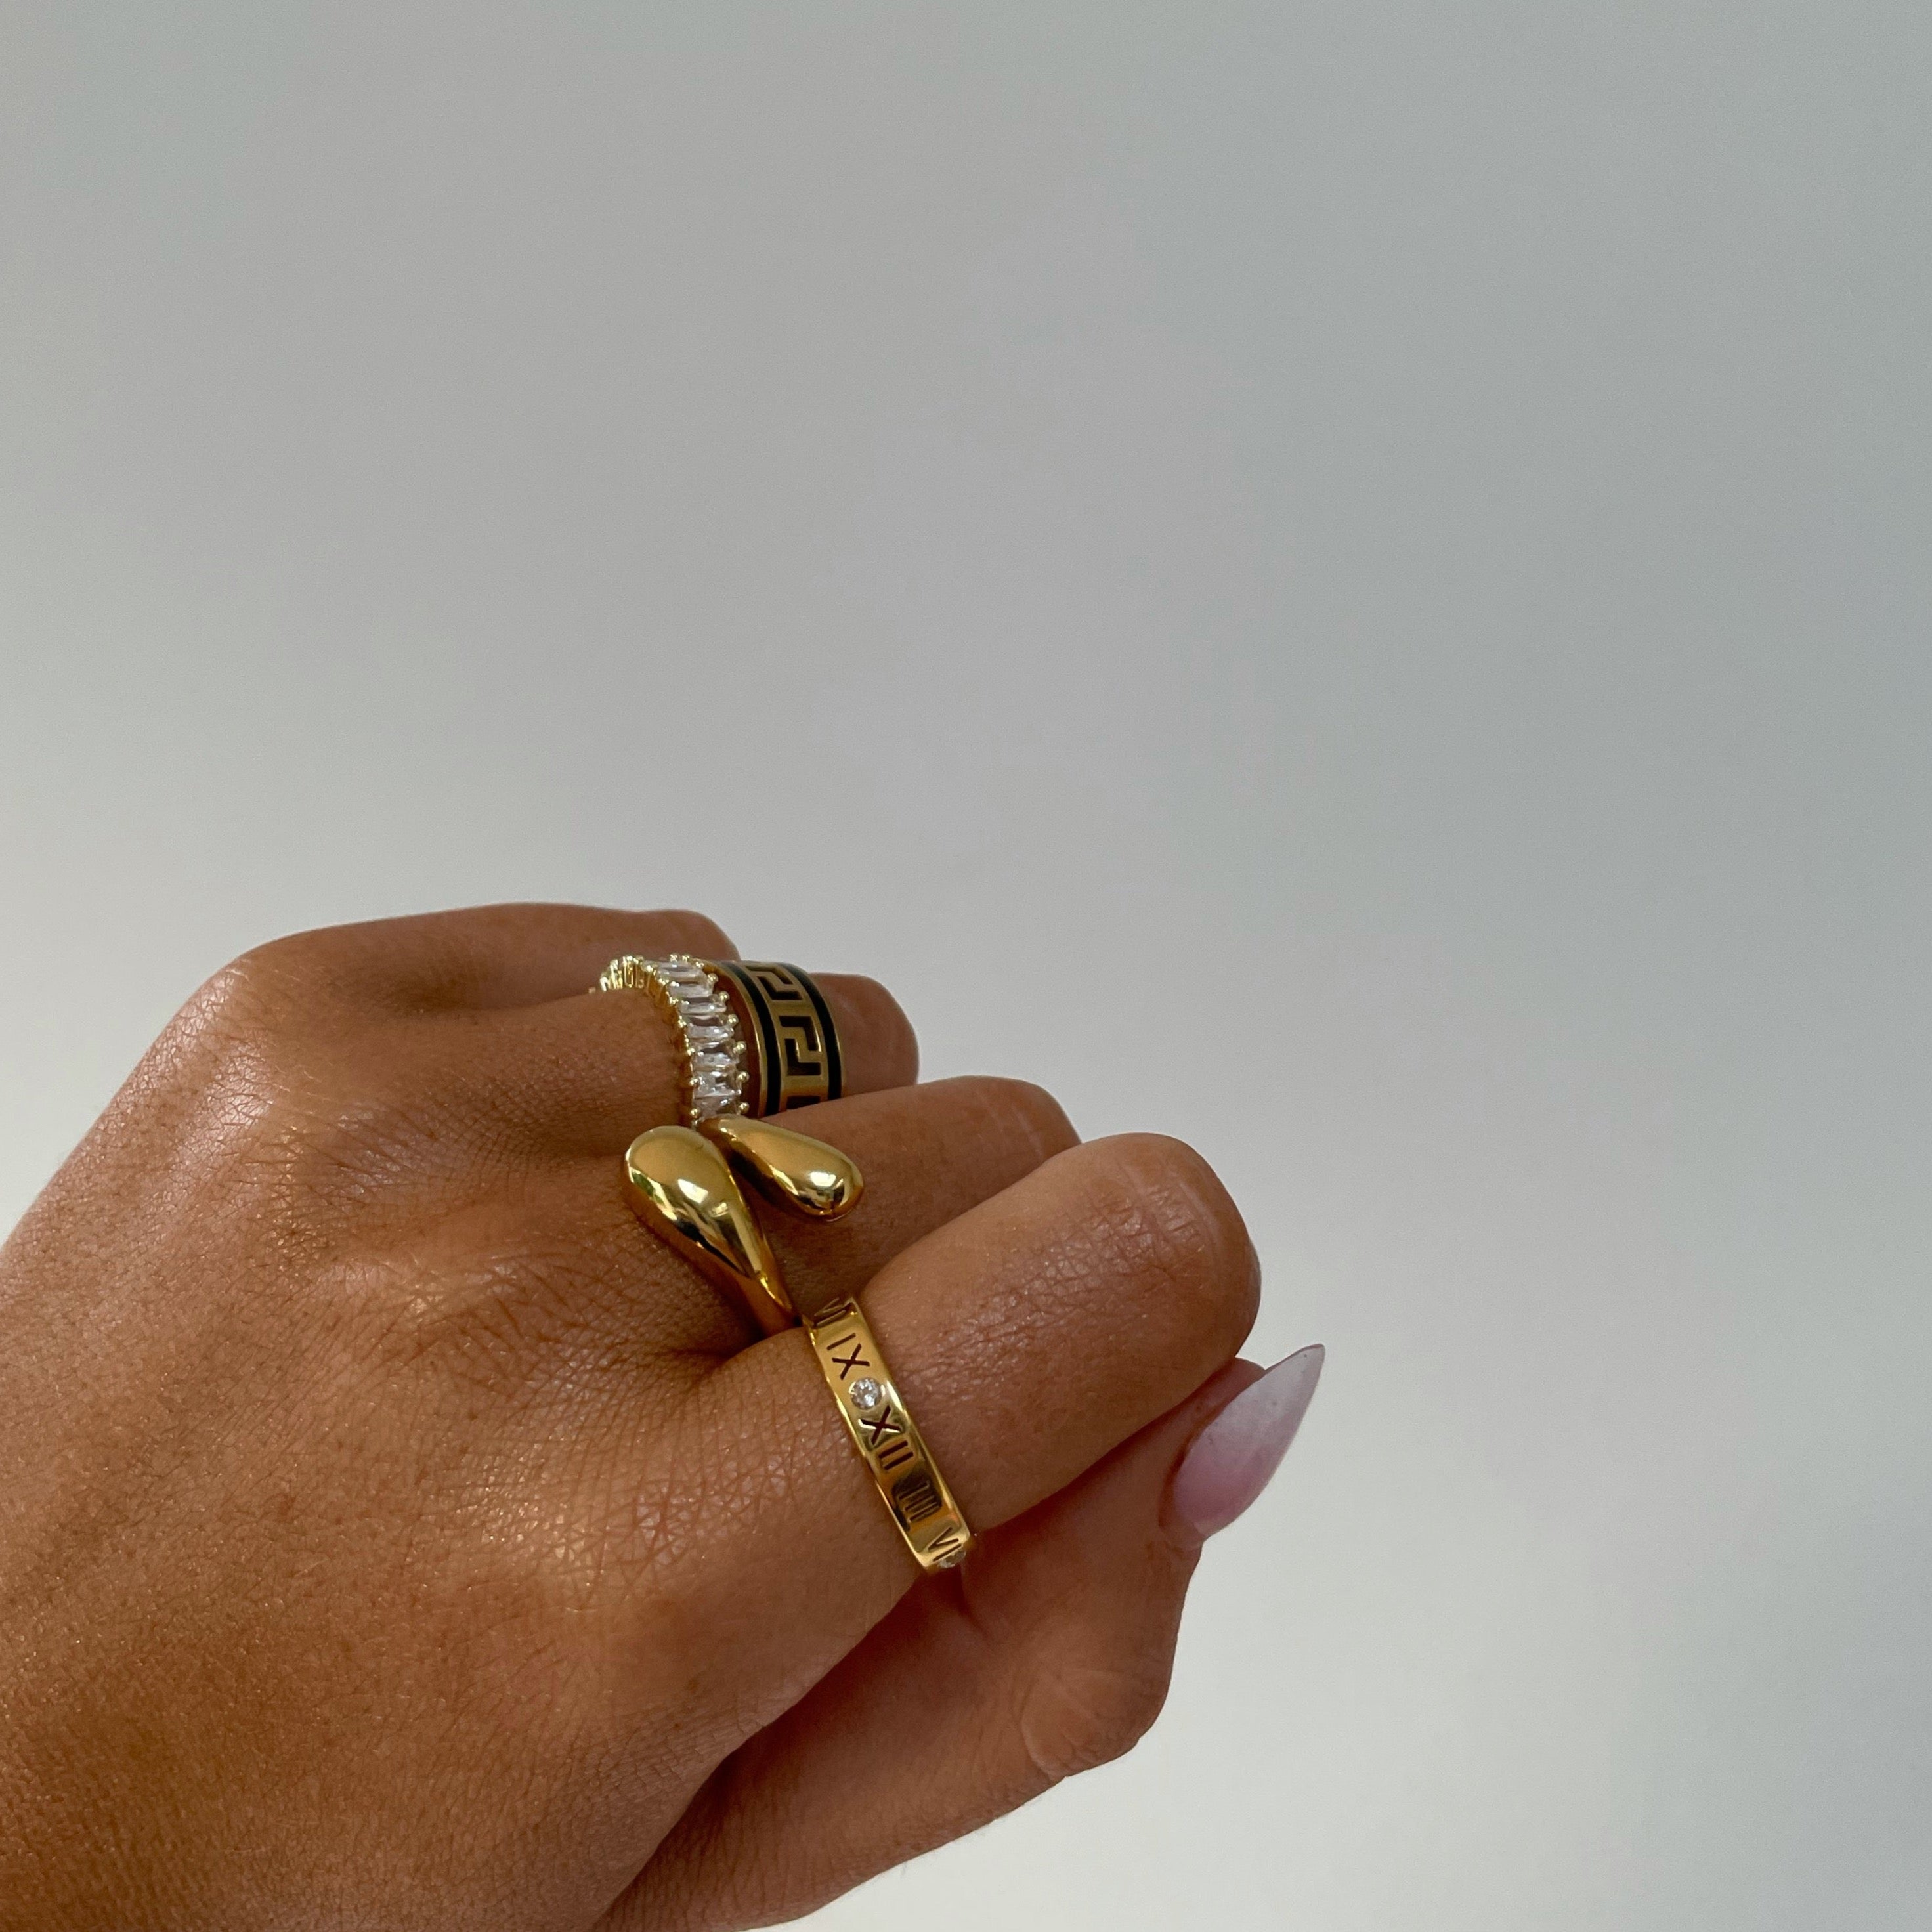 Stage 5 Clinger Ring Twist Irregular Ring. Adjustable Size. Material: Stainless Steel.zoandco jewellery ireland Dublin